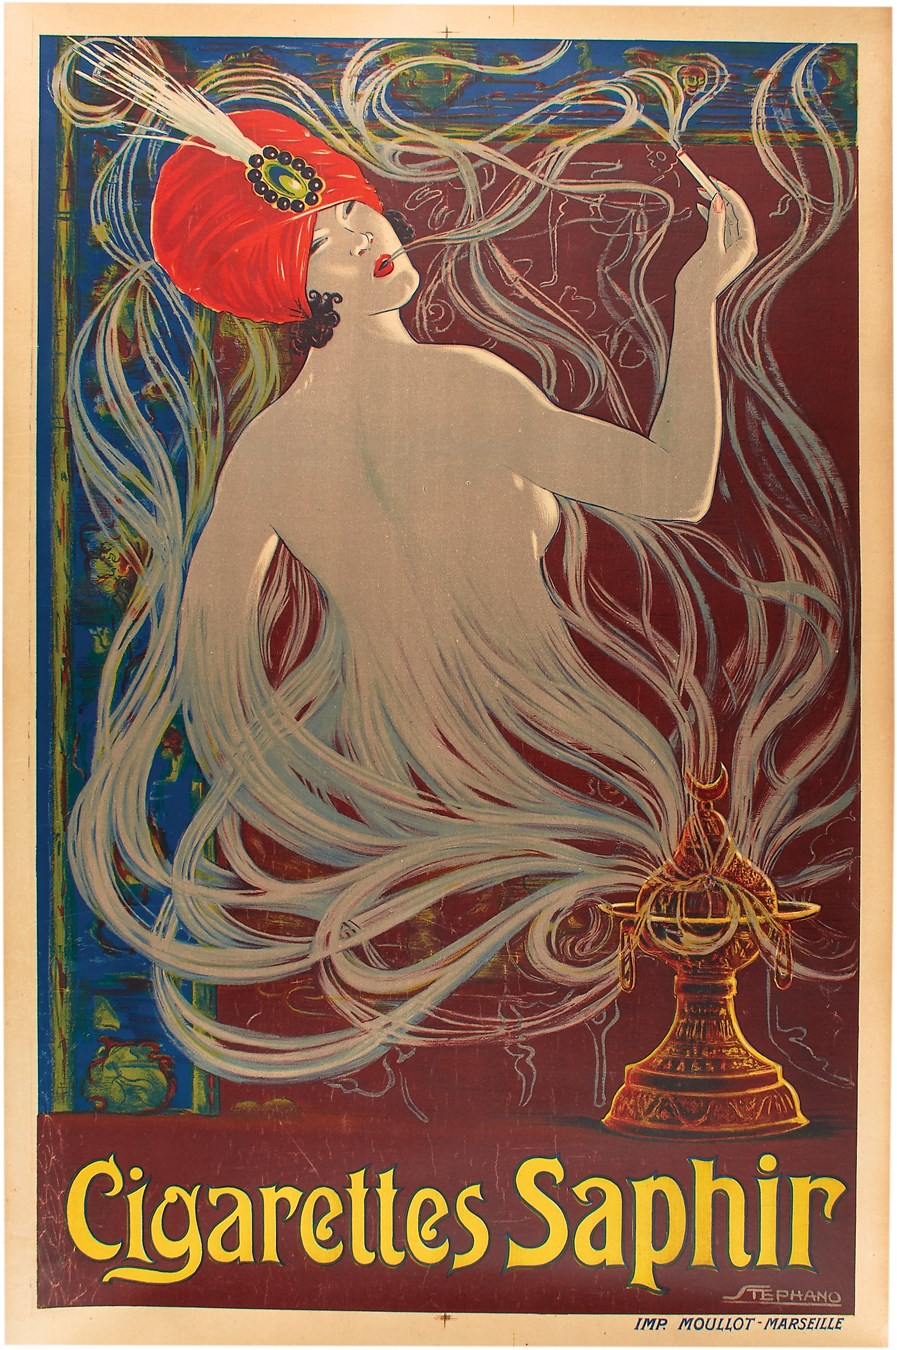 Rock 'N' Roll - Art Nouveau Turn of the Century Saphir Cigarettes French Art Poster by Stefano